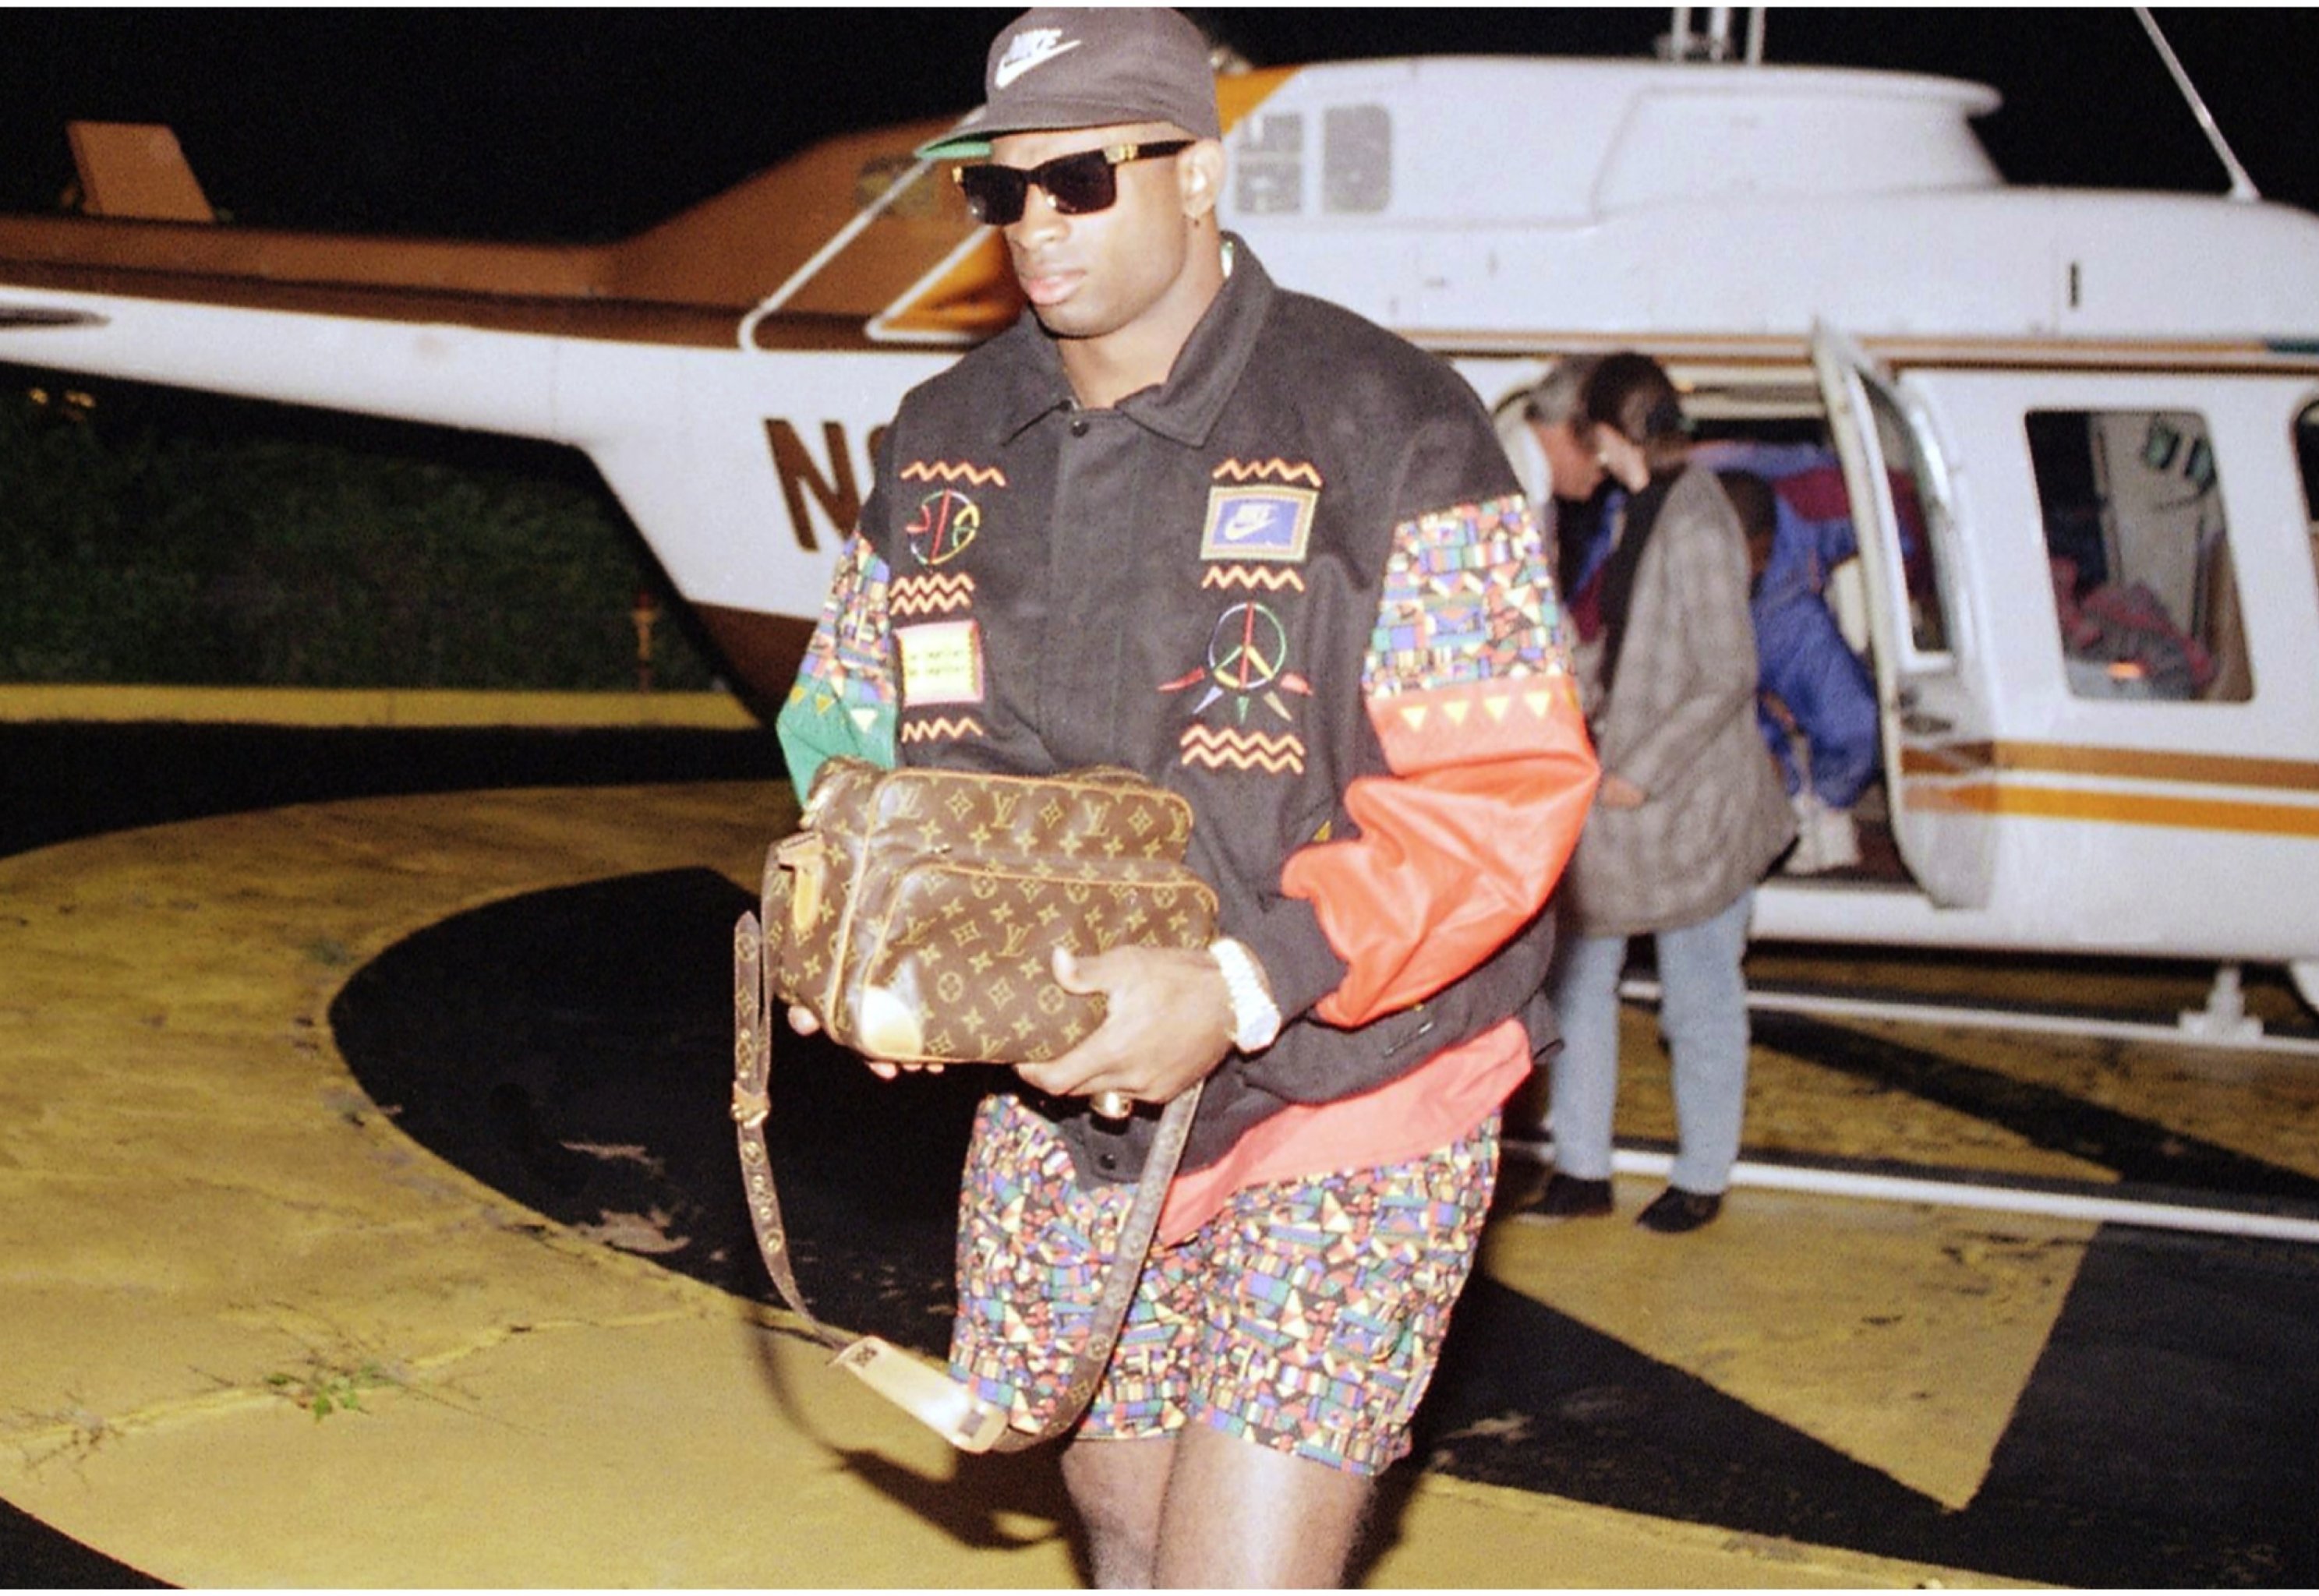 Swagged-Out Athletes of the '90s  News, Scores, Highlights, Stats